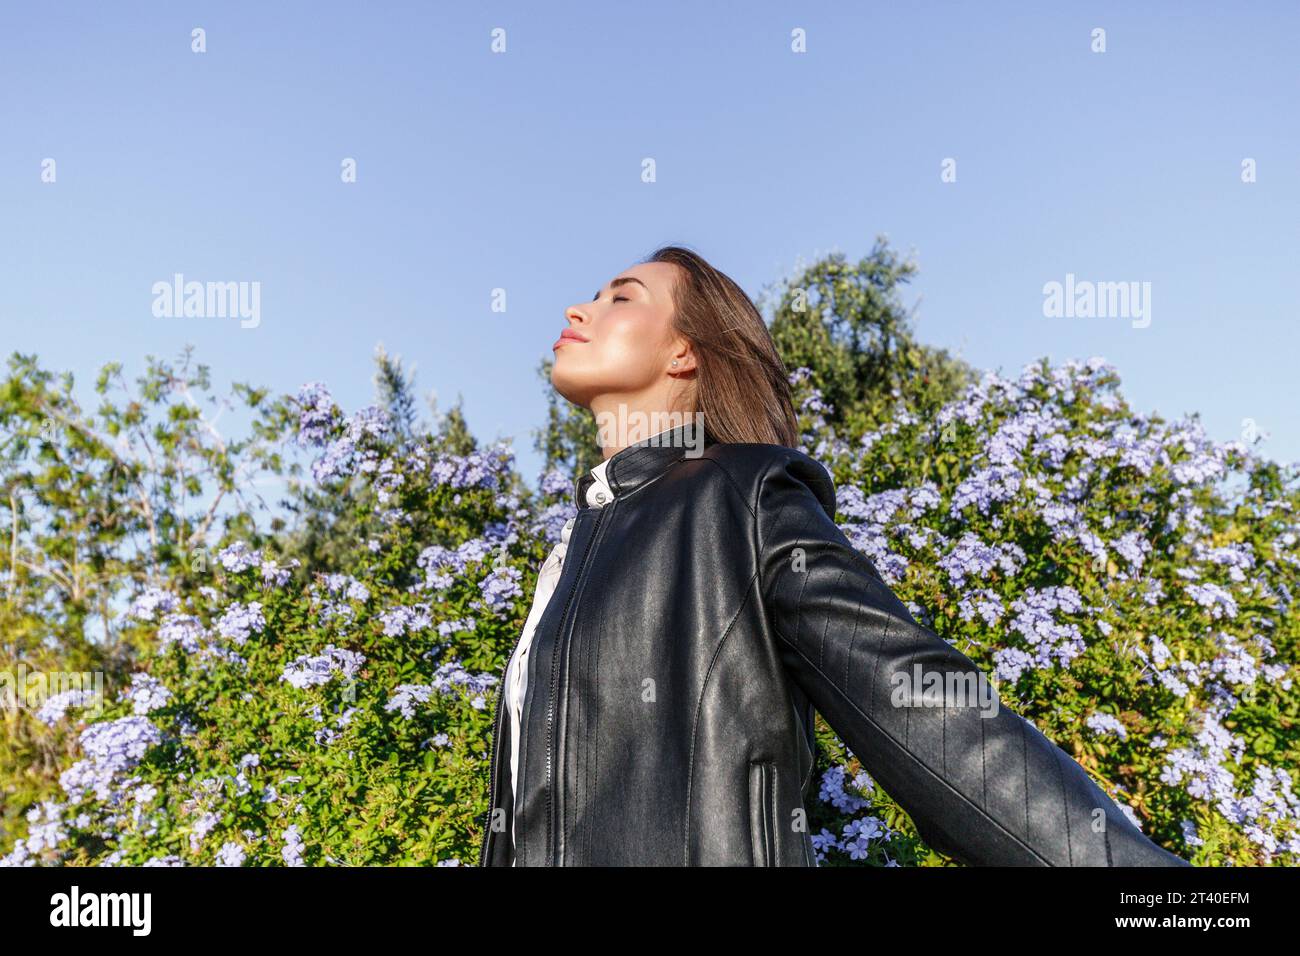 pretty young woman with blonde hair and dressed in a leather jacket, with her eyes closed breathing fresh air in the forest on a sunny day Stock Photo